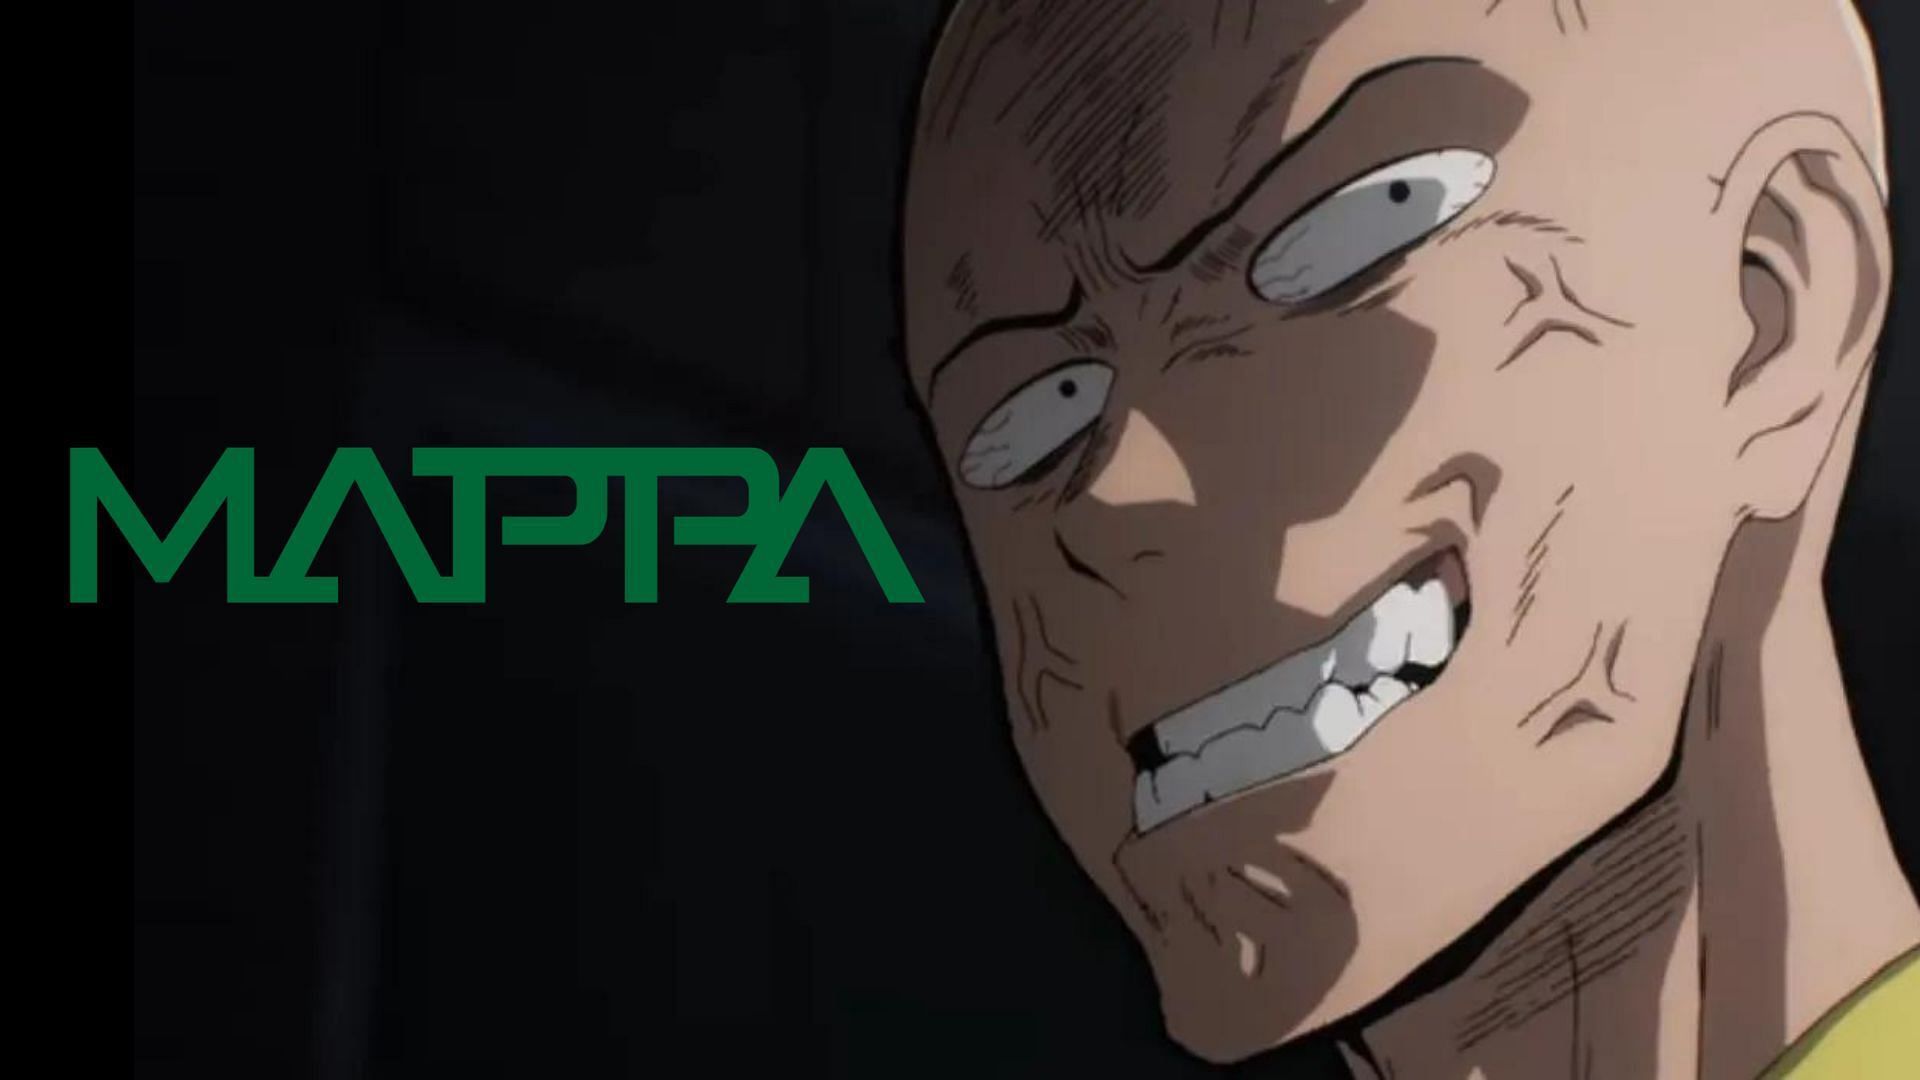 One Punch Man Season 3 likely delayed infinitely as MAPPA struggles